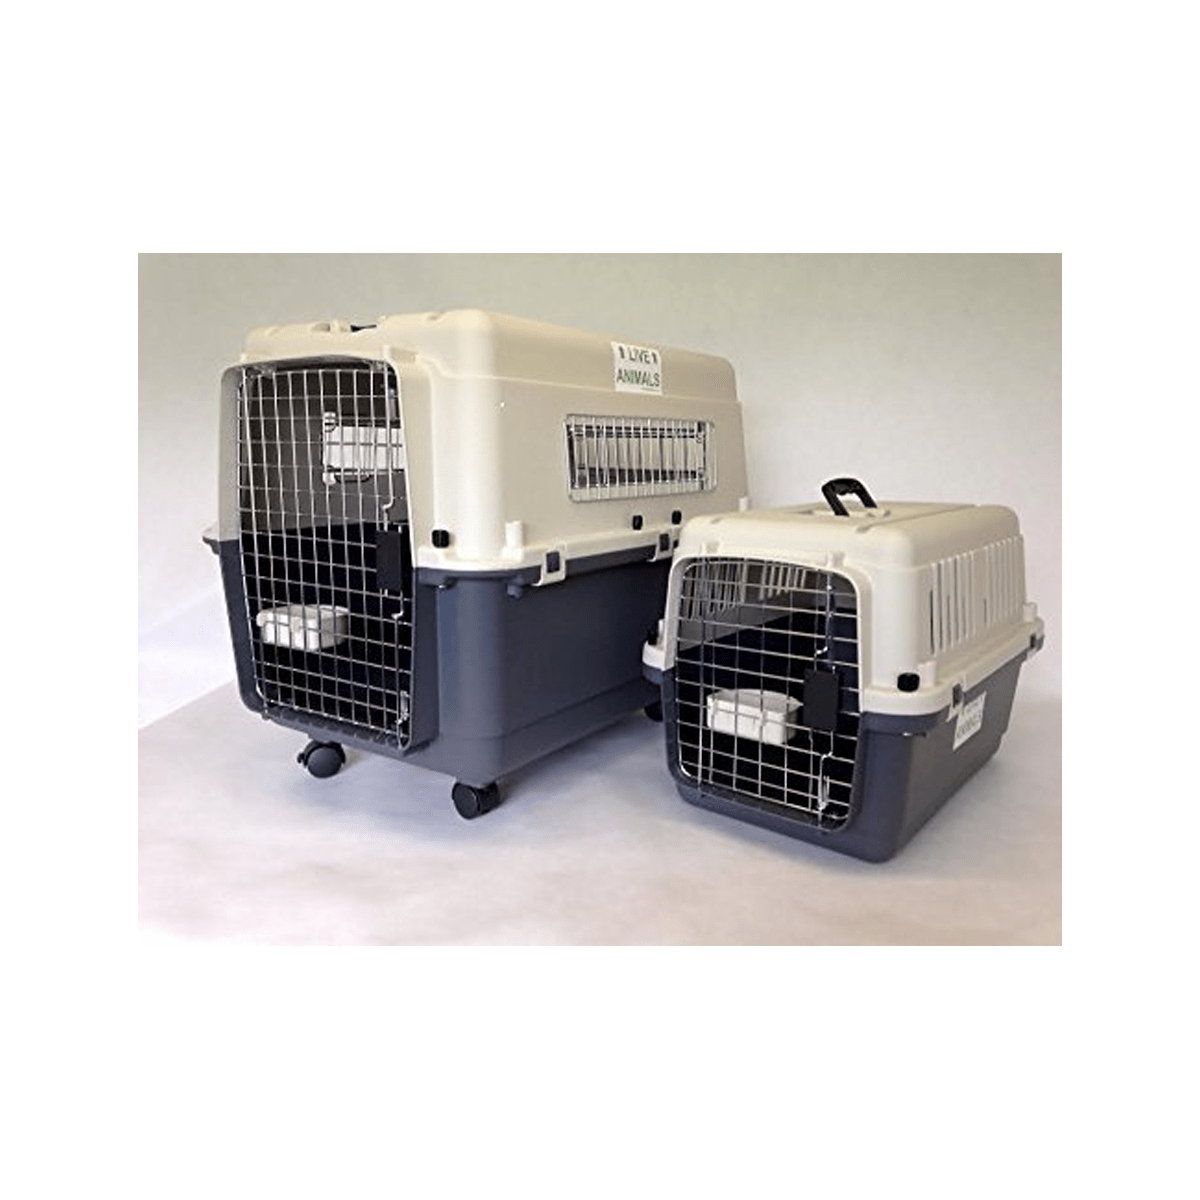 L120 IATA approved Luxx giant airline approved pet carrier, with wheels